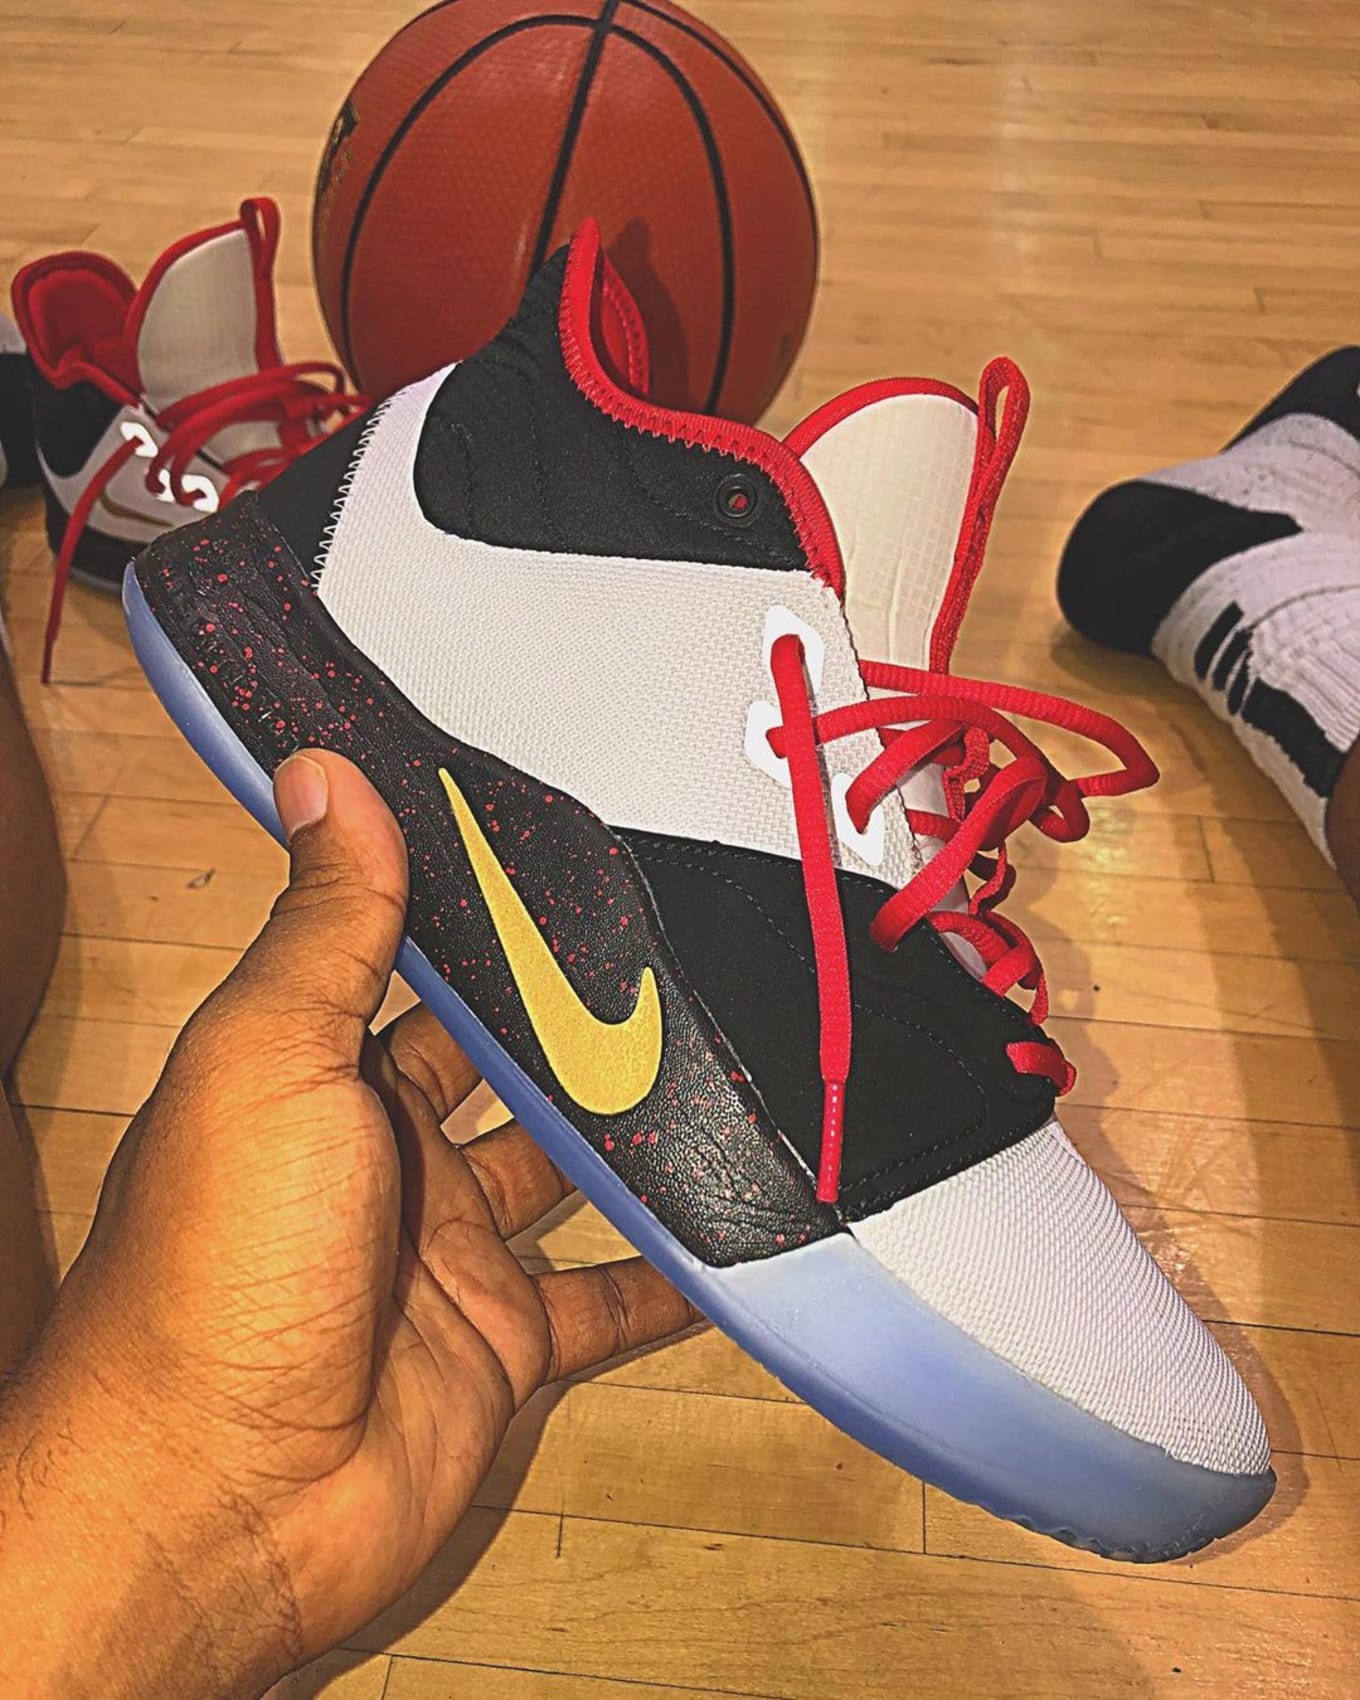 Nike By You Pg3 Id Designs | Sole Collector